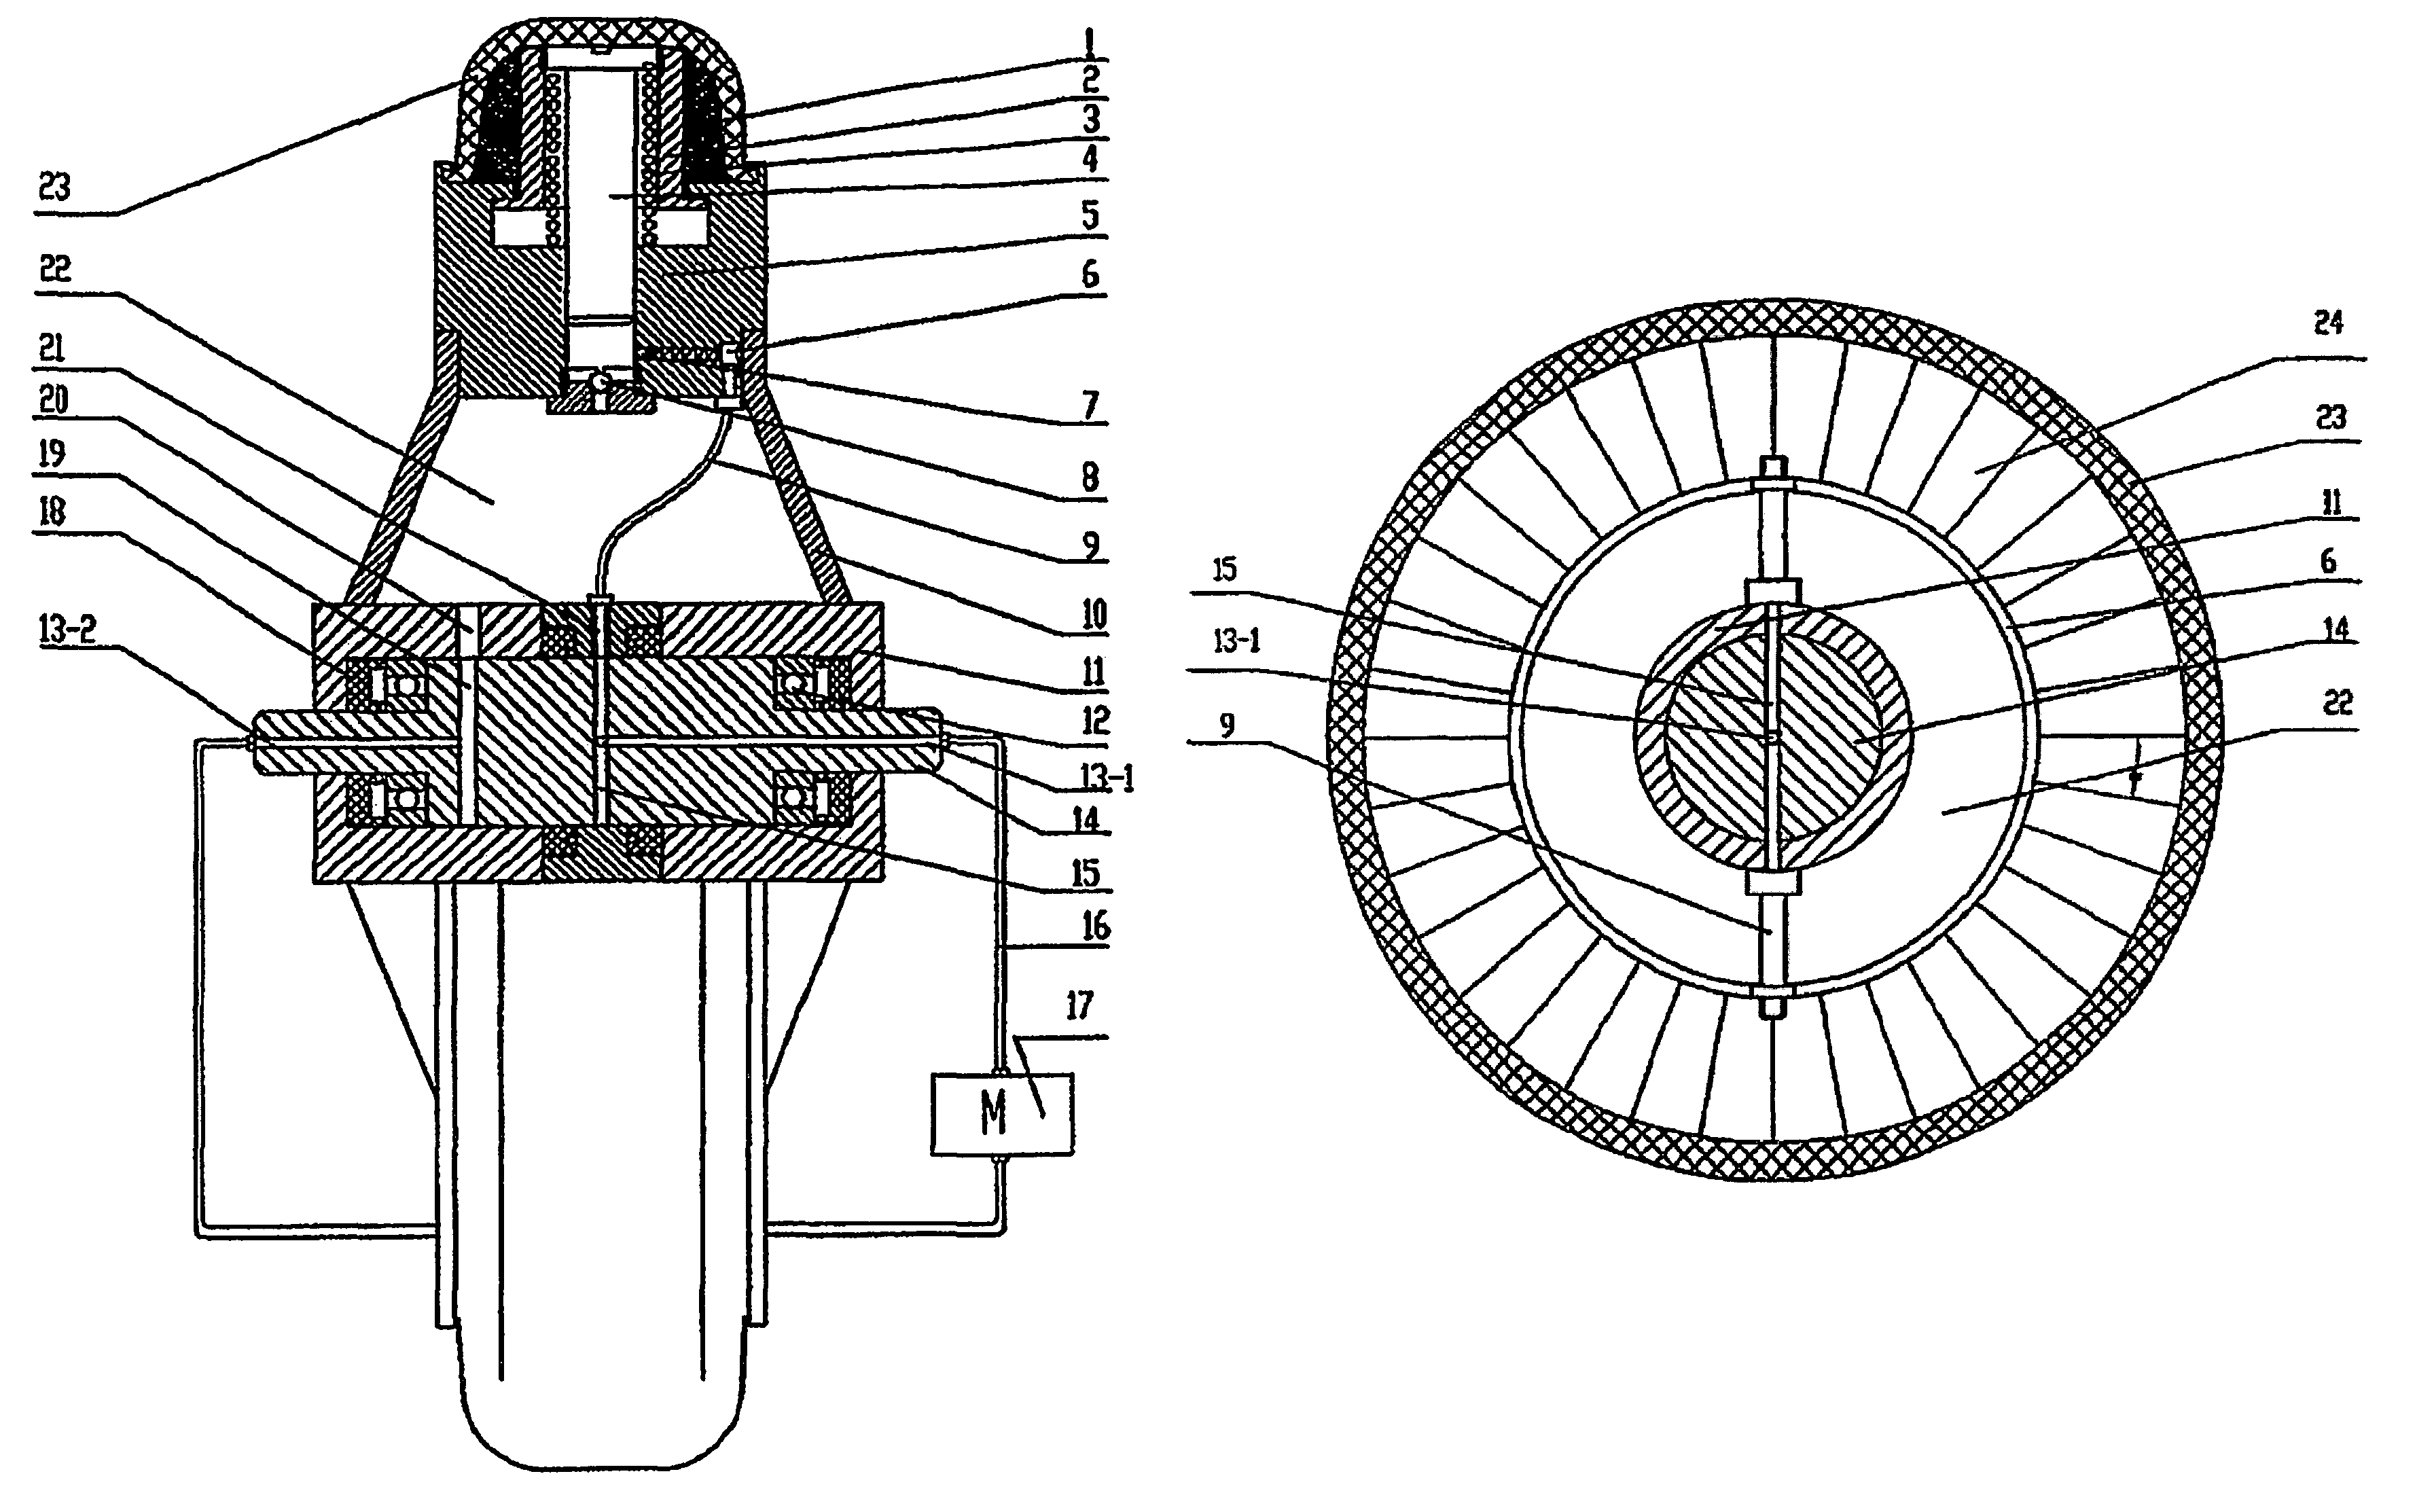 Energy conversion apparatus for wheeled vehicles